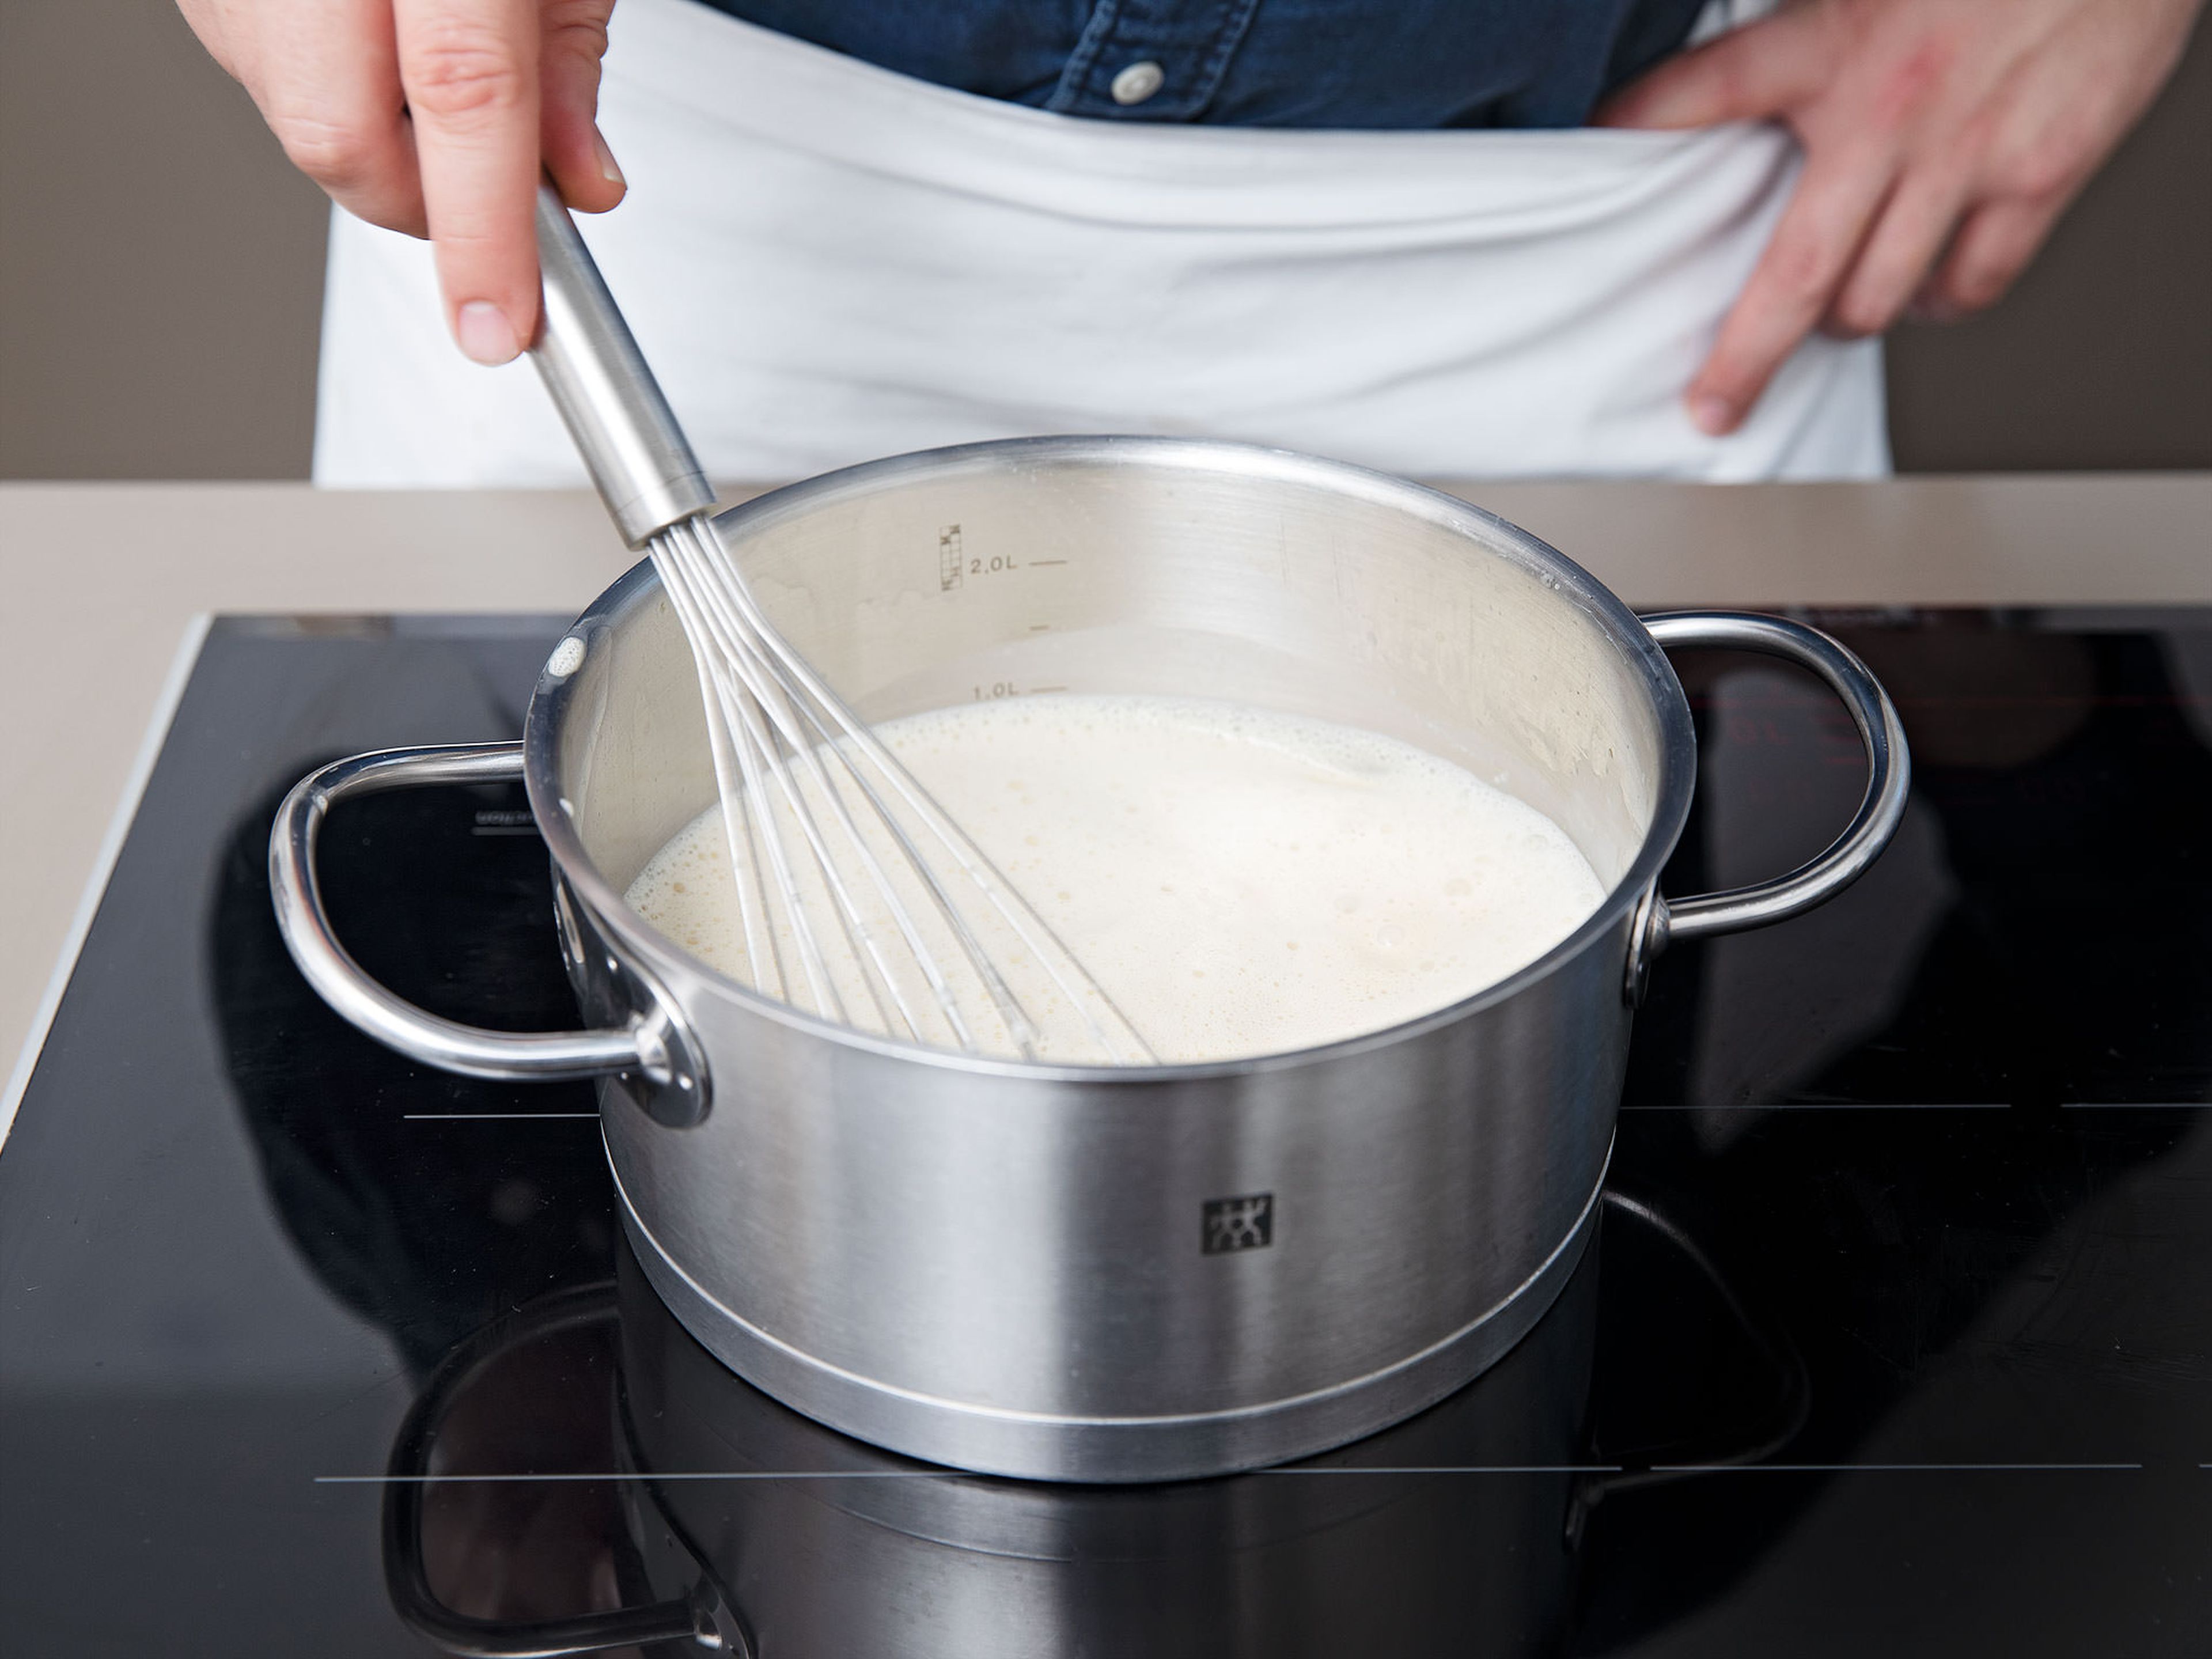 In a liquid measuring cup, combine remaining heavy cream and whole milk. In a pot, add maple syrup, brown sugar, water, and remaining salt and bring to a boil over medium heat, stirring occasionally. Cook for about 8 min. or until caramelized. Remove from the heat and slowly whisk in heavy cream-milk mixture. In a separate bowl, whisk together egg, egg yolks, and starch. While whisking, slowly add maple syrup-cream mixture to the egg-cornstarch mixture. Transfer the pudding back to the pot and set over medium heat, whisking constantly until a thick pudding forms, approx. 5 min. Strain the mixture through a fine sieve into a bowl, then cover tightly with plastic wrap (pressing the plastic directly onto the pudding to stop a skin from forming) and refrigerate for at least 2 hours.